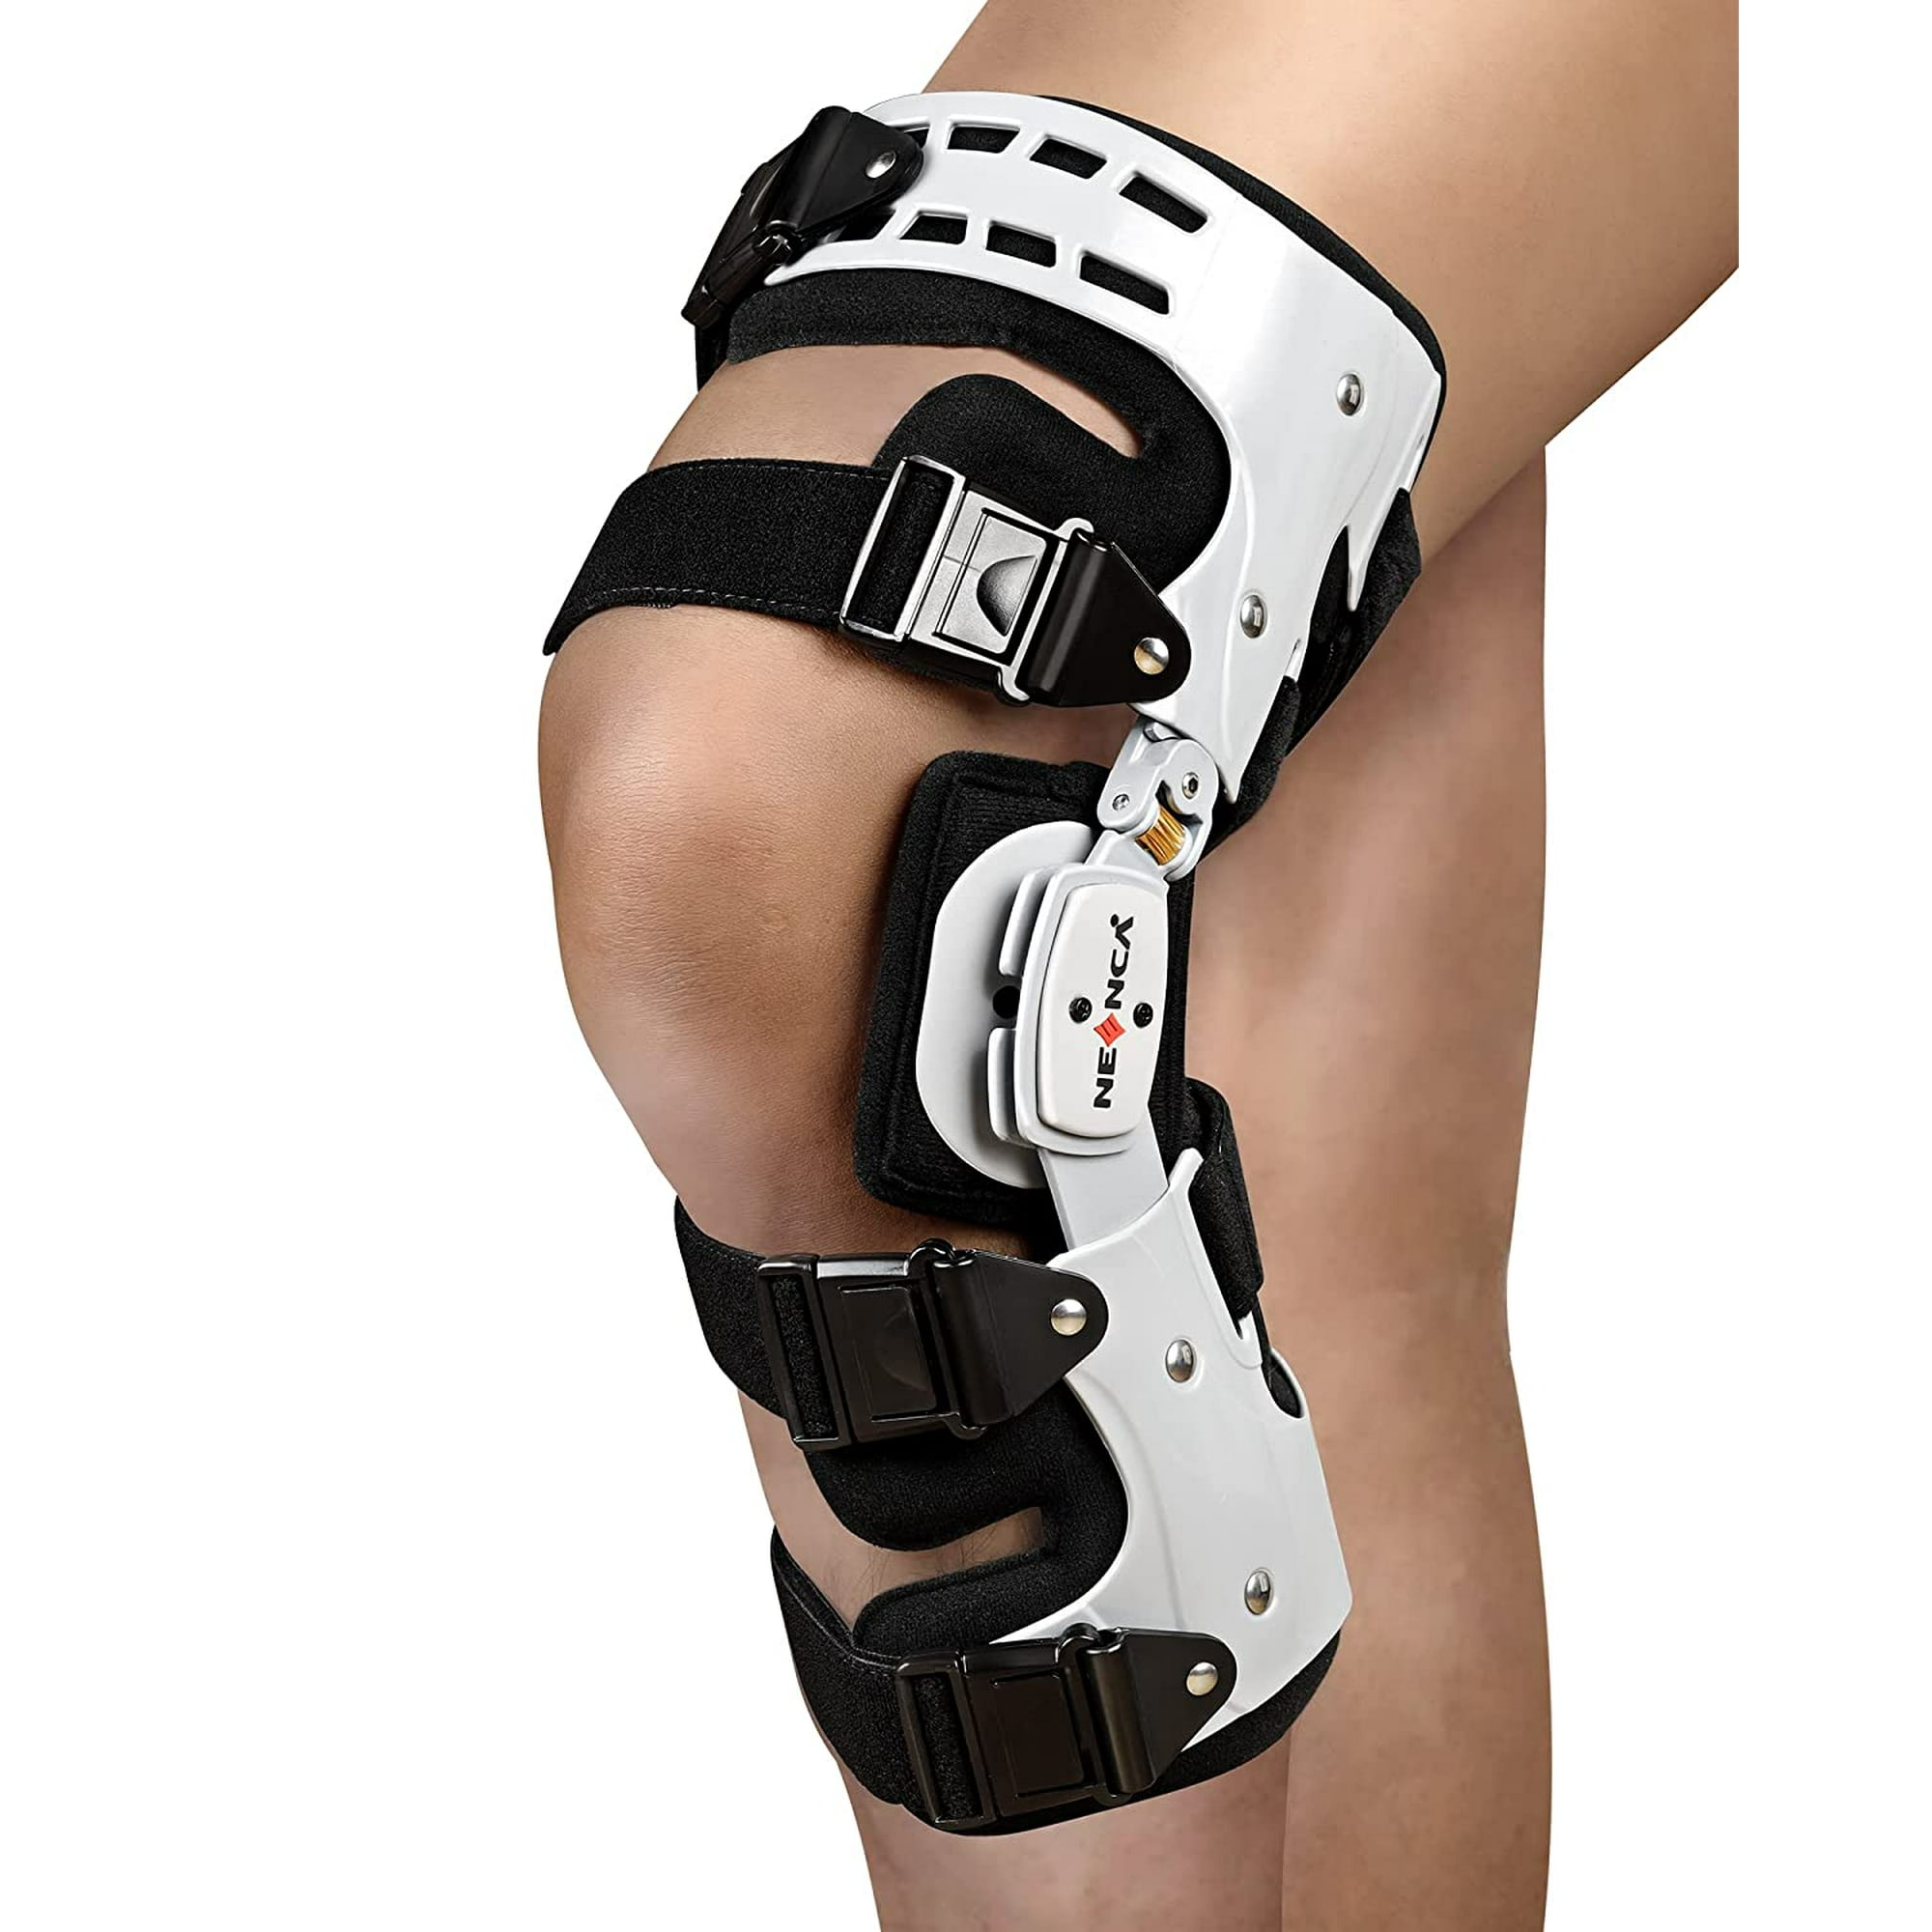 Breg Post-Op Knee Brace - Browse Our High-Quality Knee Brace